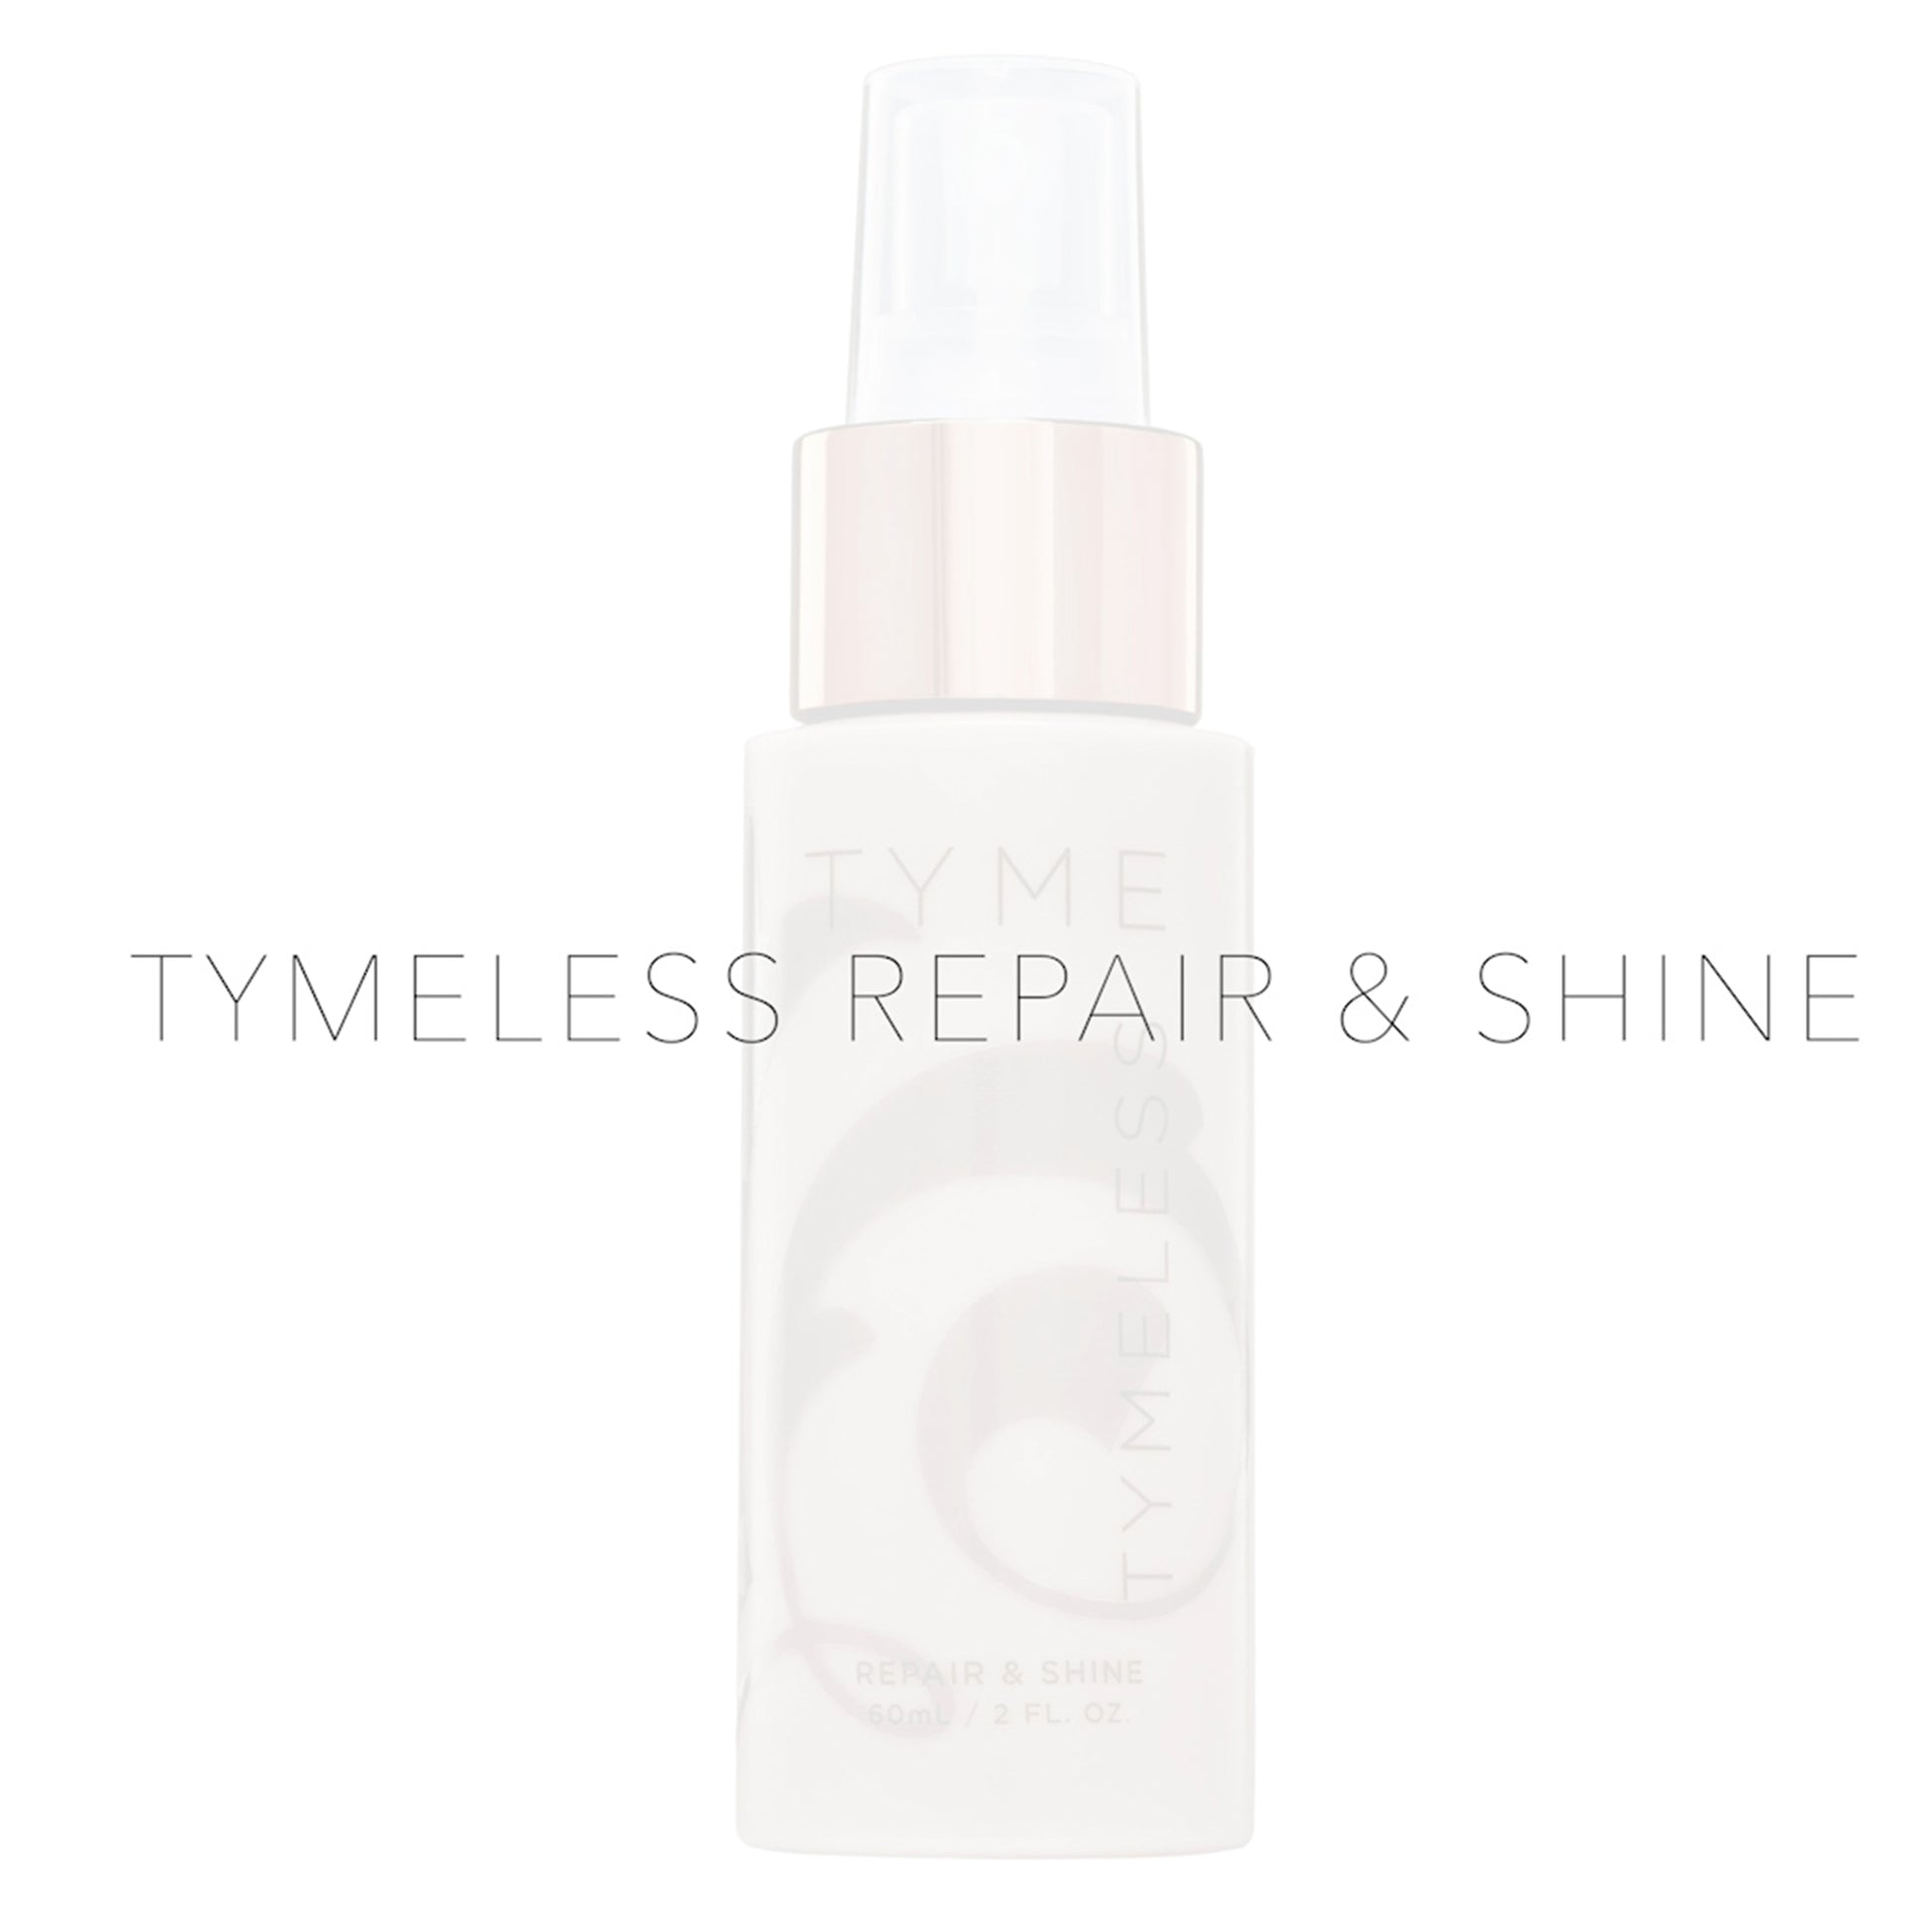 TYME Inventor and CEO, Jacynda Smith says TYMELESS Repair and Shine Spray makes your hair look and feel lustrous and repairs your hair.